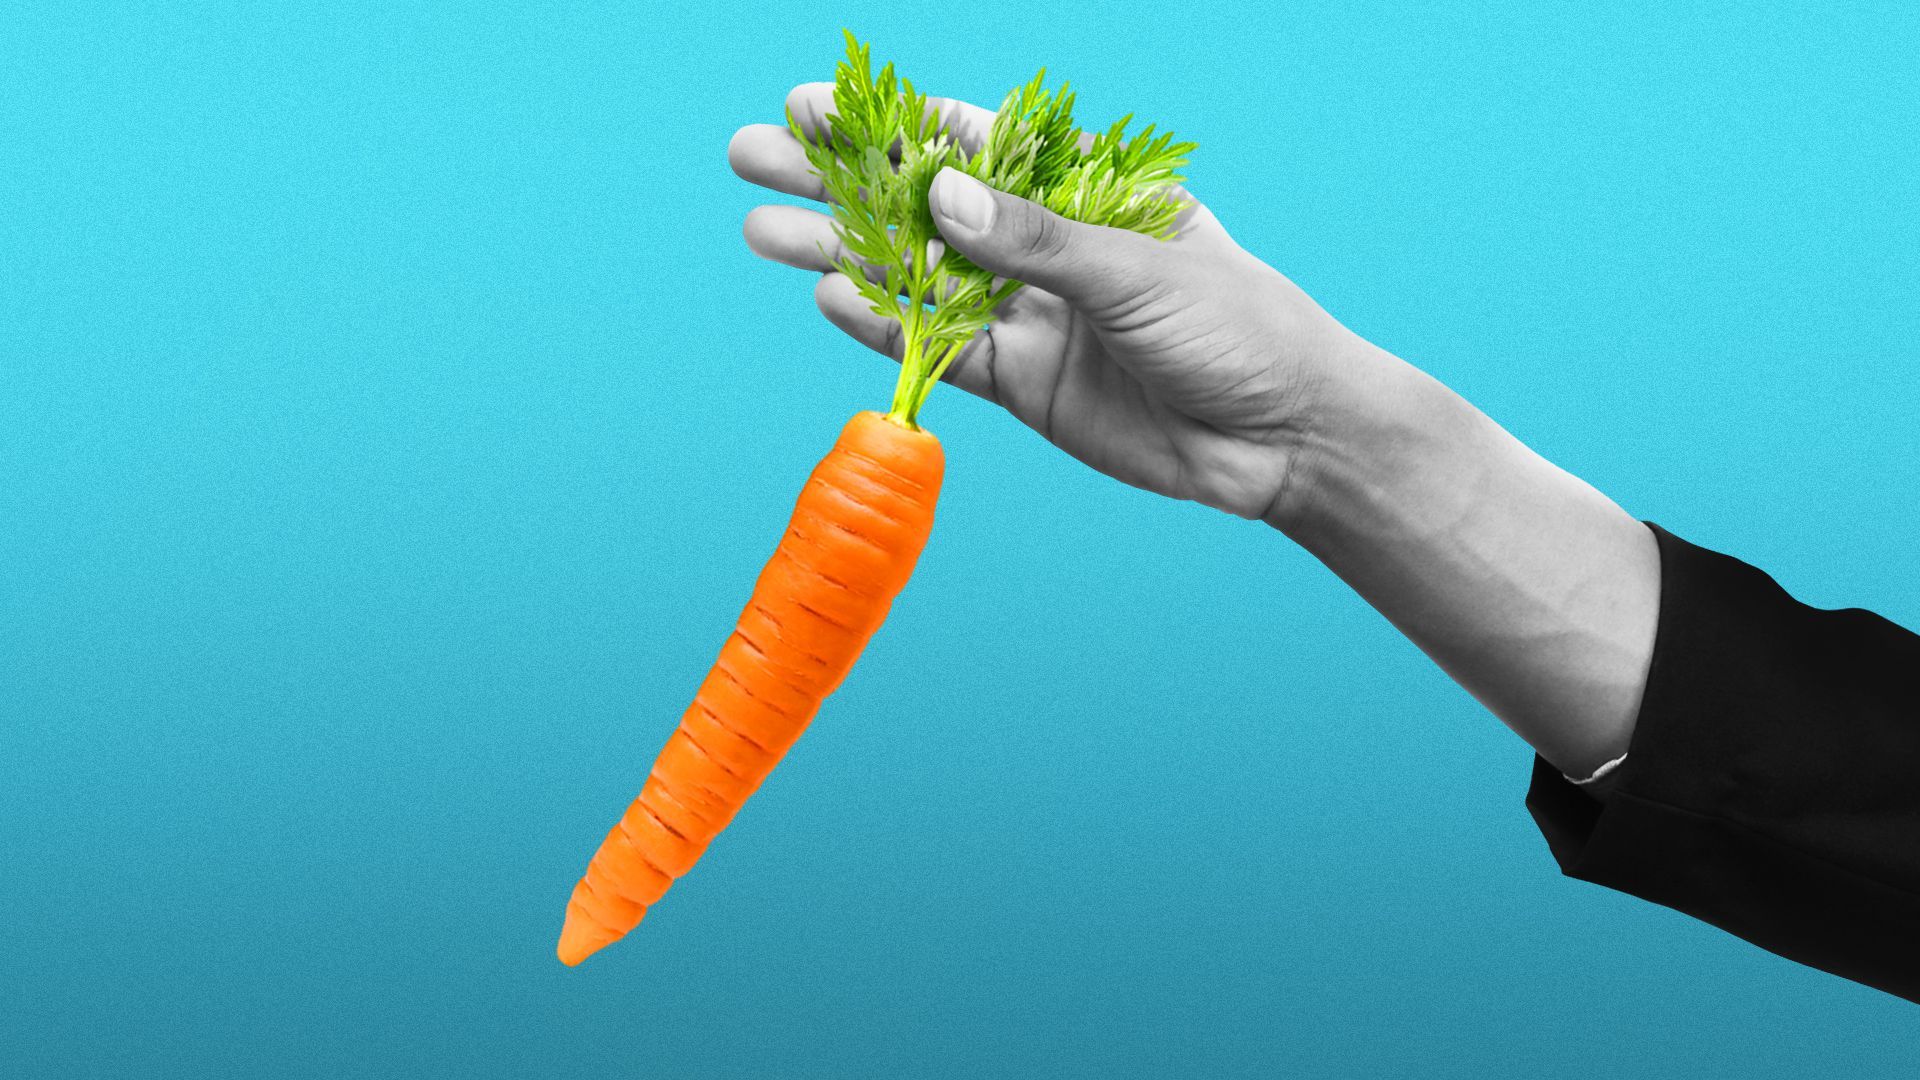 Illustration of a hand in a business suit dangling a carrot.